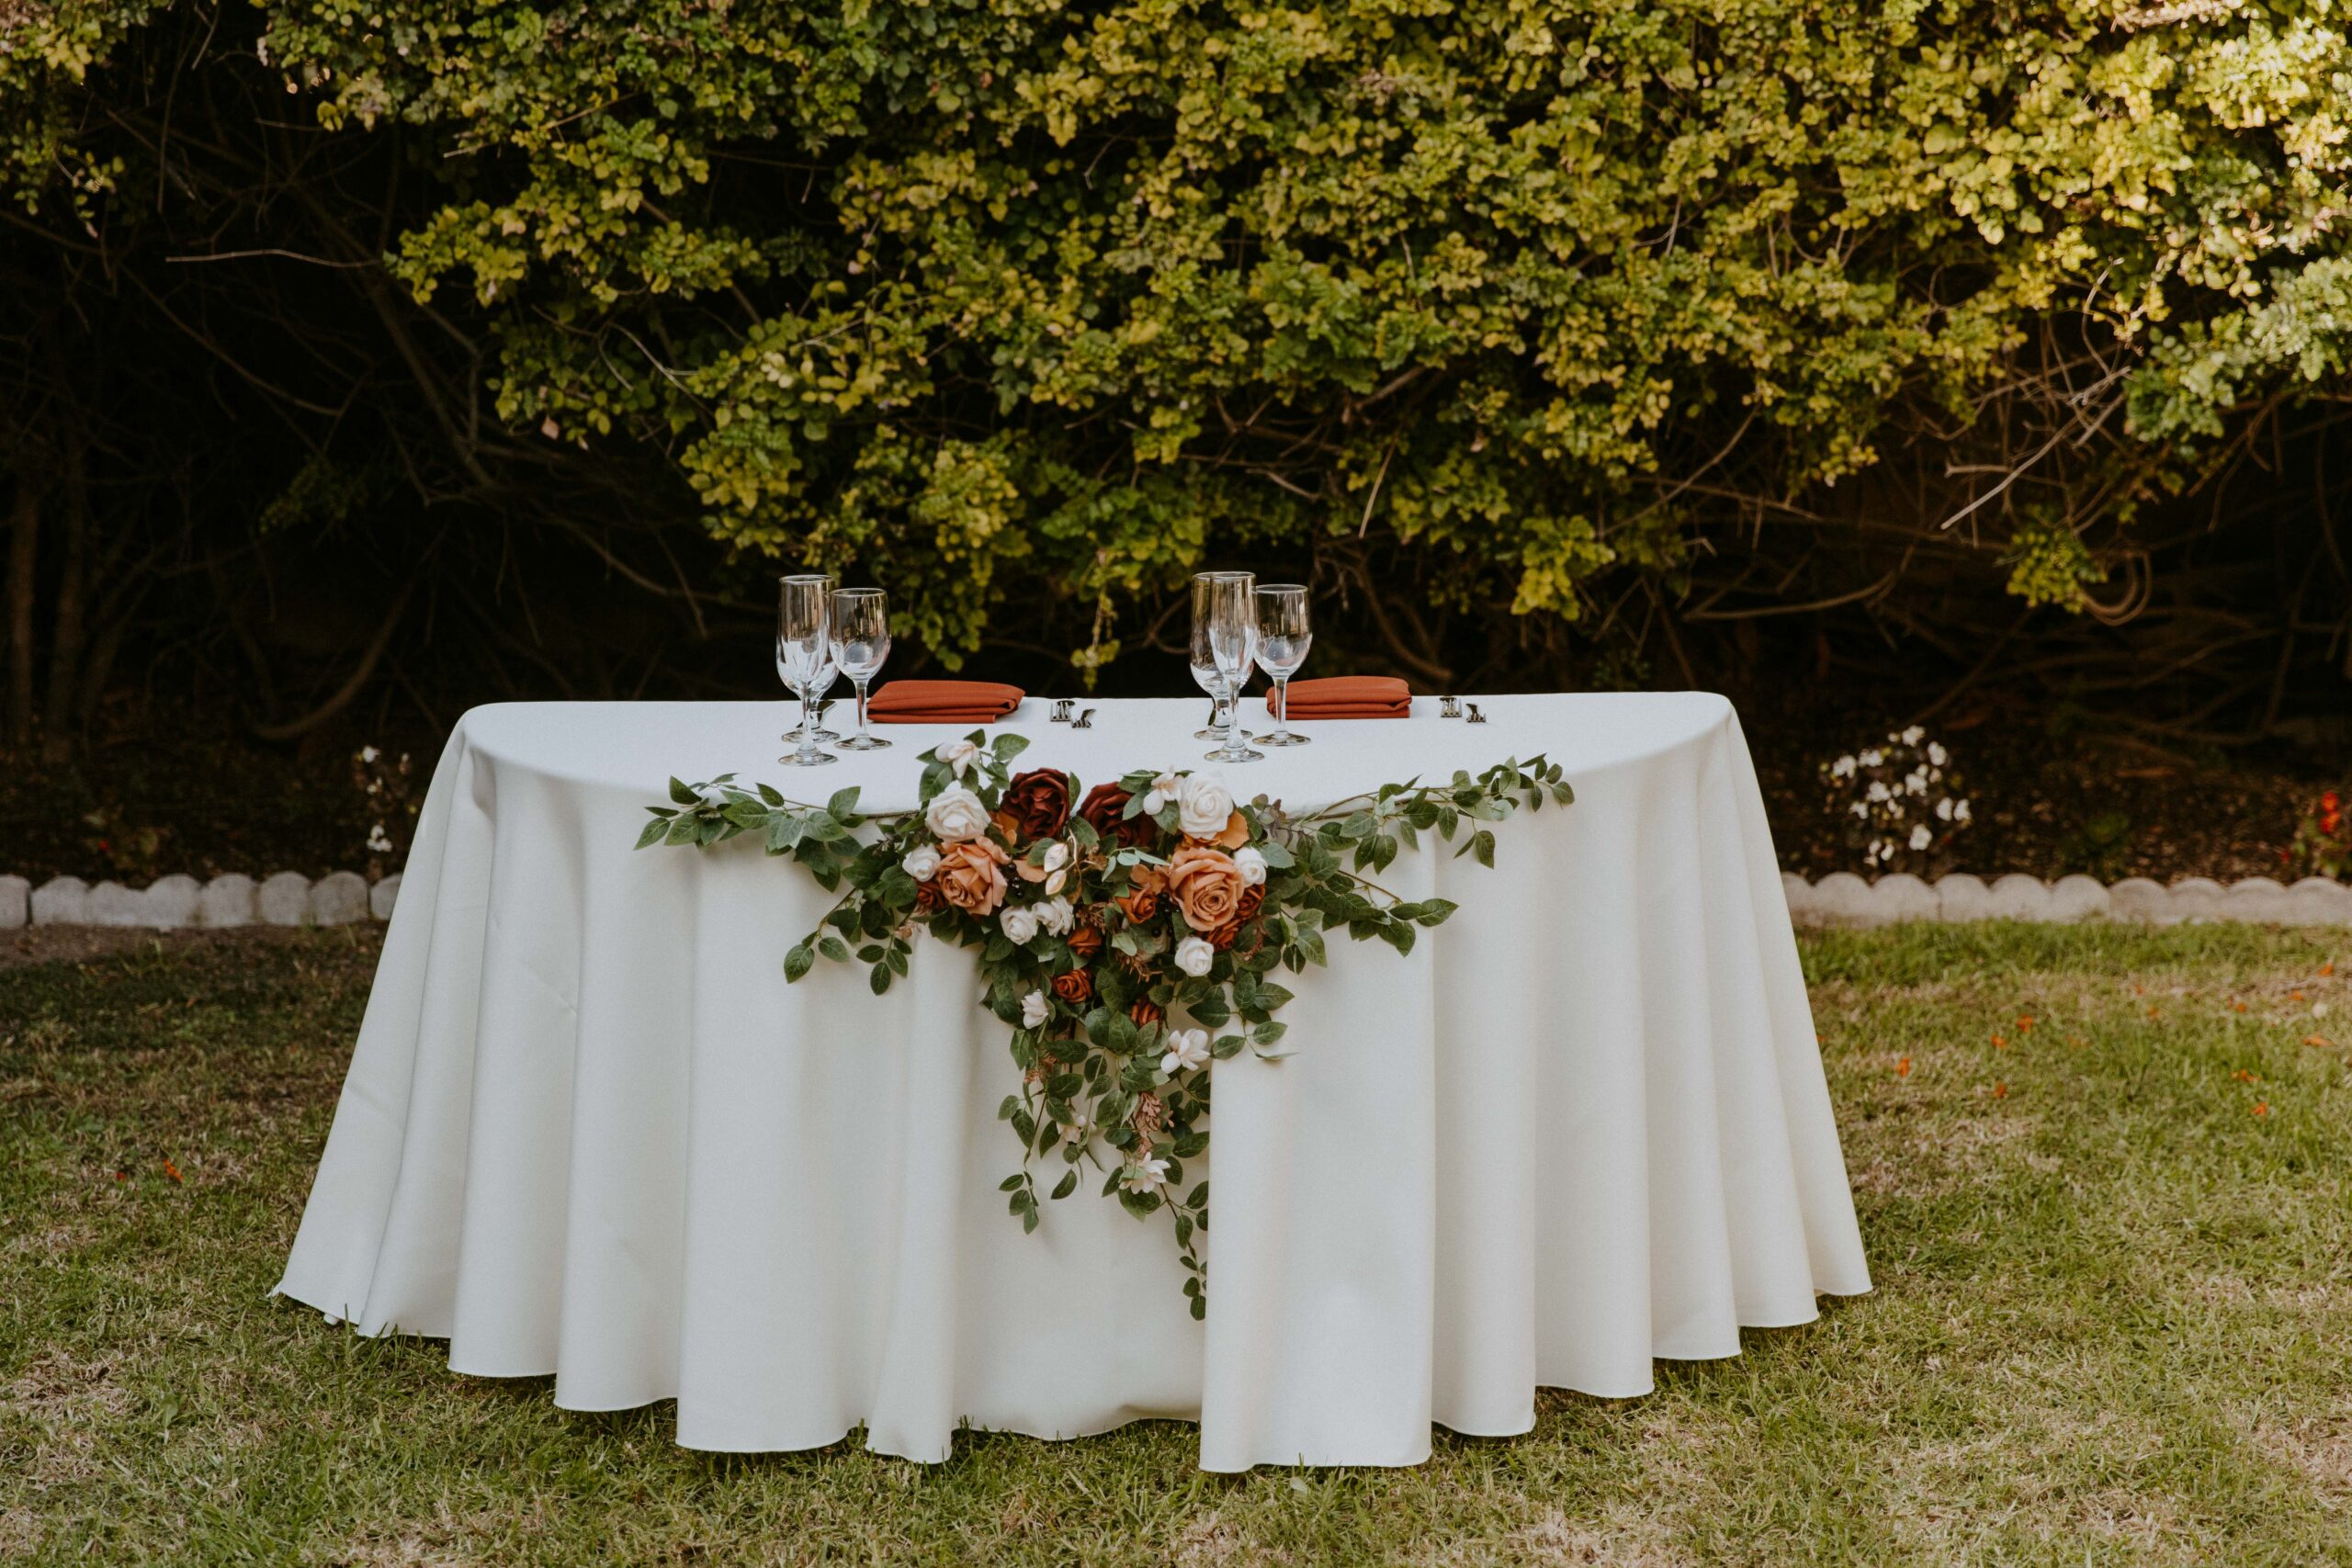 Elegantly set dining table for two with floral centerpiece and candlelight outdoors at an intimate backyard wedding